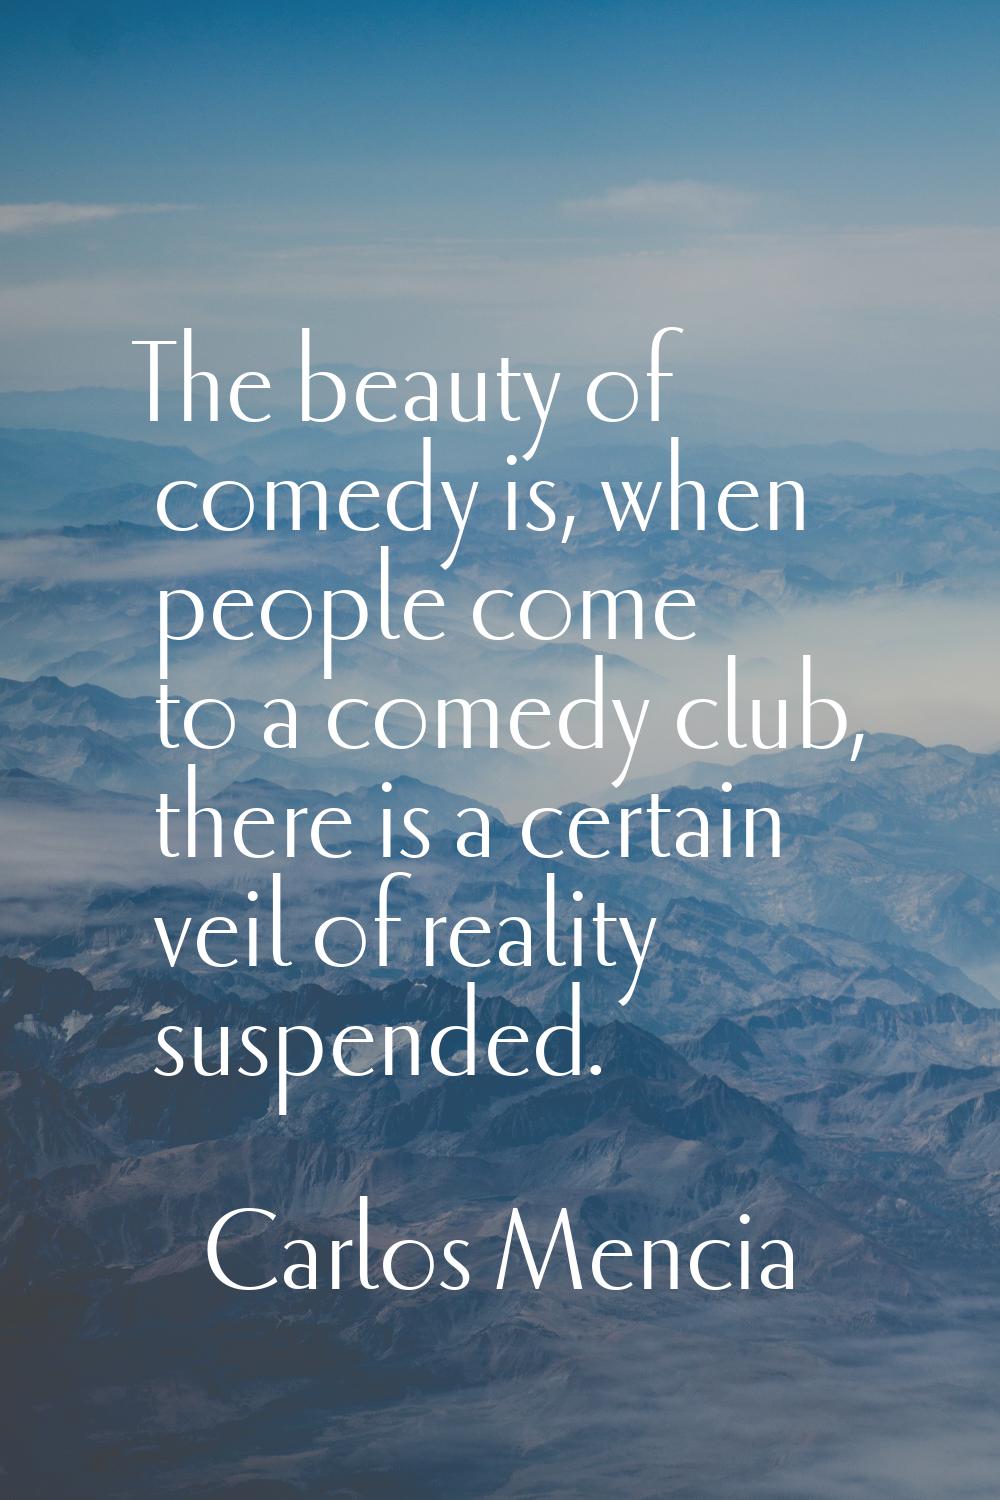 The beauty of comedy is, when people come to a comedy club, there is a certain veil of reality susp